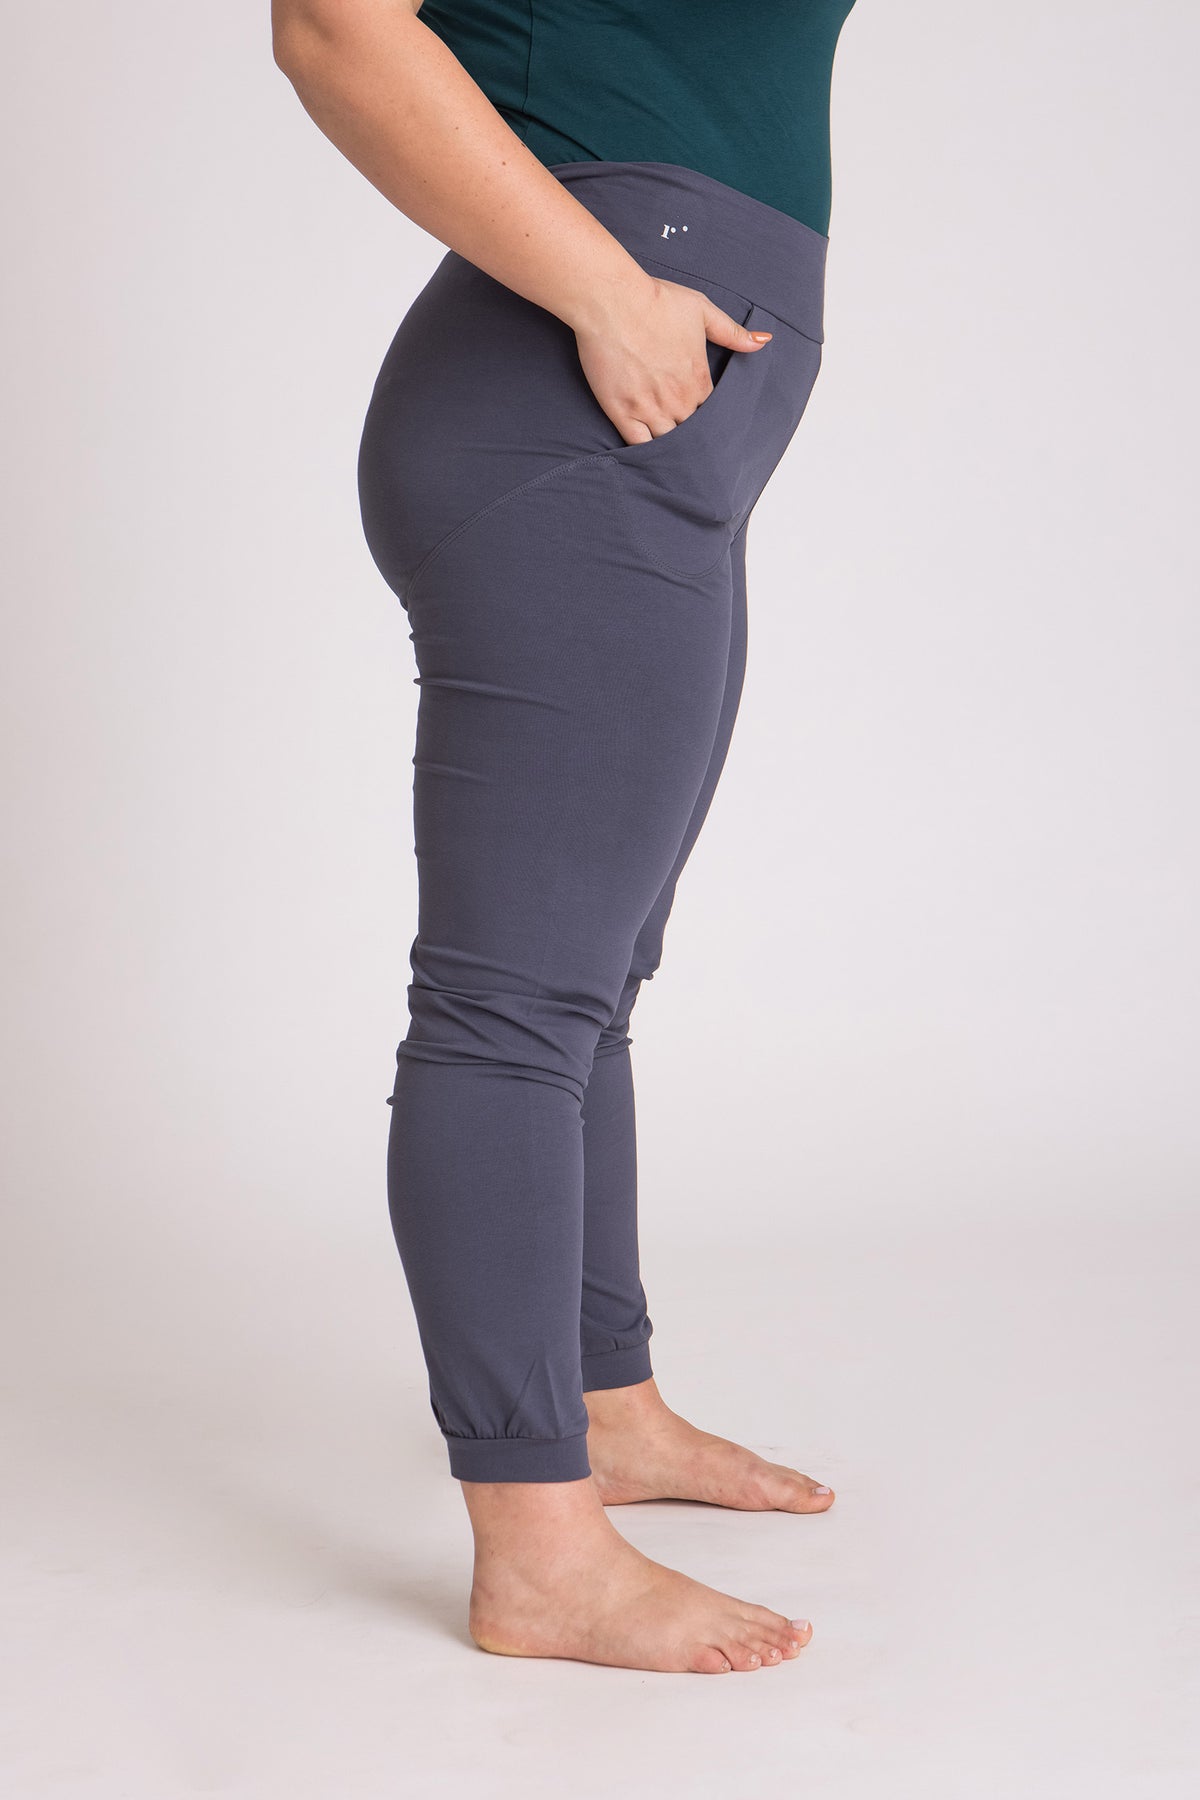 I’mPerfect Organic Cotton Unisex Slouchy Pants 50%off